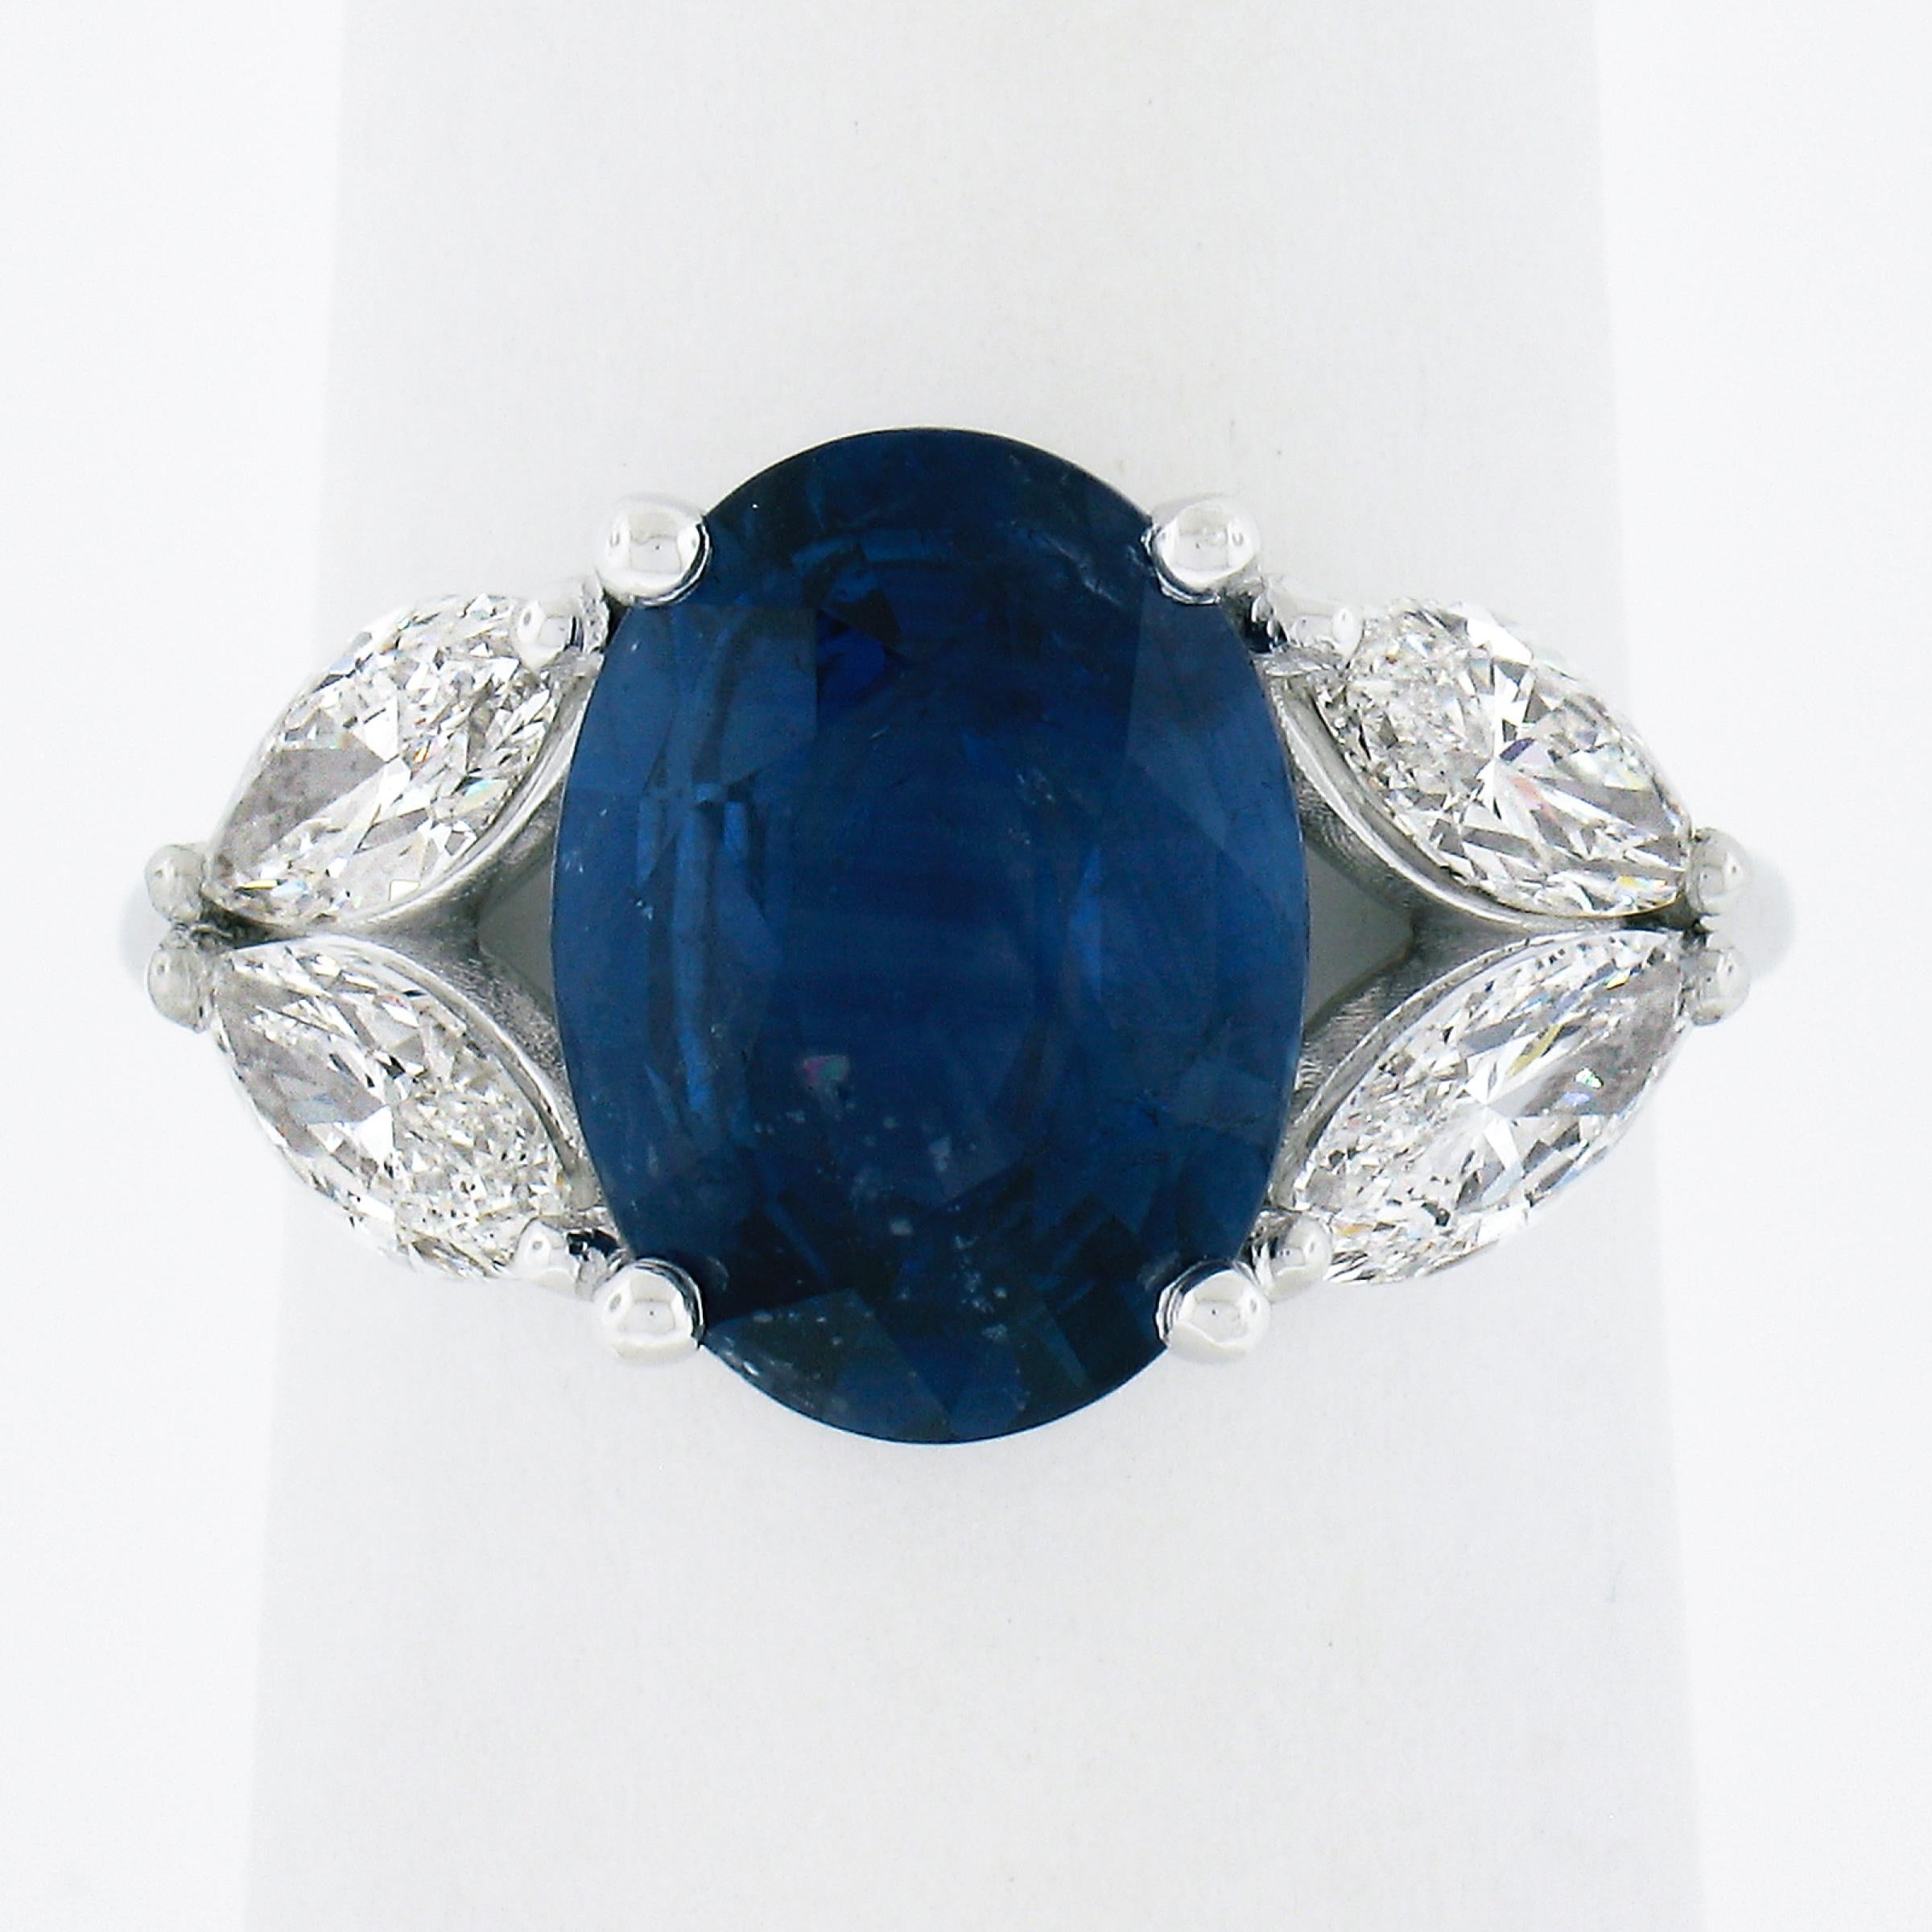 --Stone(s):--
(1) Natural Genuine Sapphire - Oval Brilliant Cut - Prong Set - Blue Color - Heated - 4.57ct (exact - certified)
**See Certification Details Below** 
(4) Natural Genuine Diamonds - Marquise Cut - Prong Set - G/H Color - VS2/SI1 Clarity